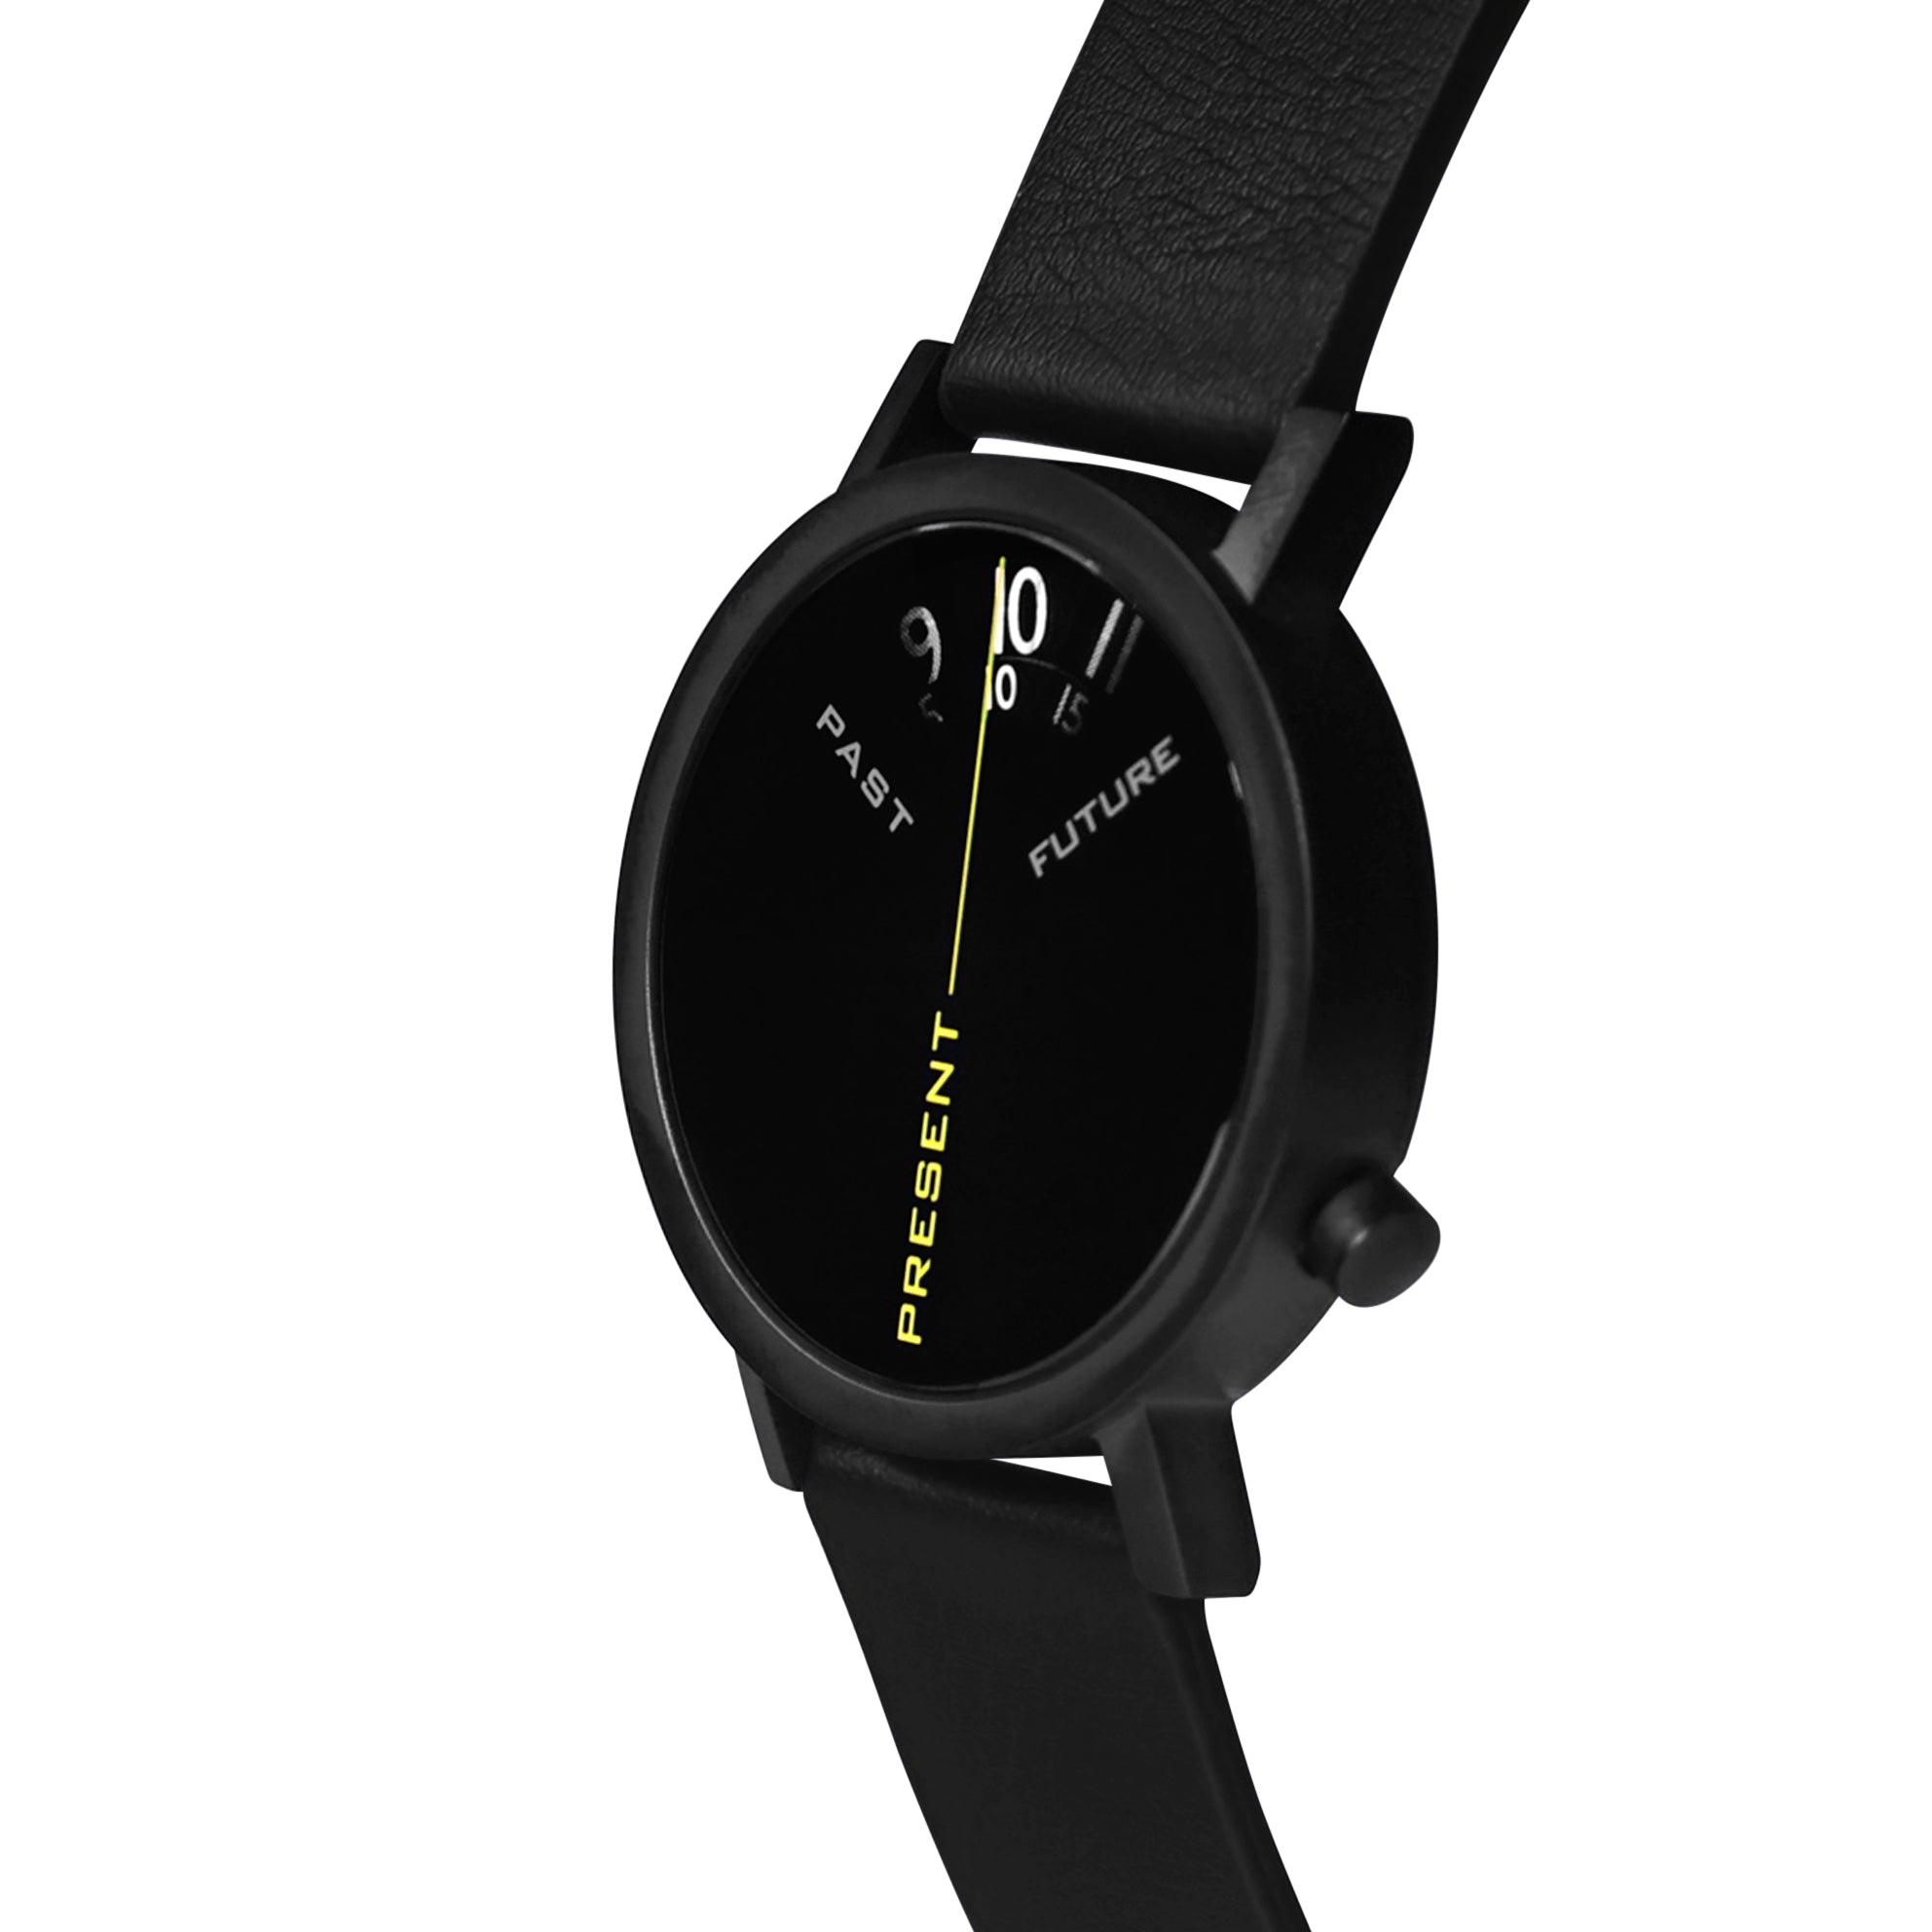 Past, Present & Future Black | 40mm - Projects Watches